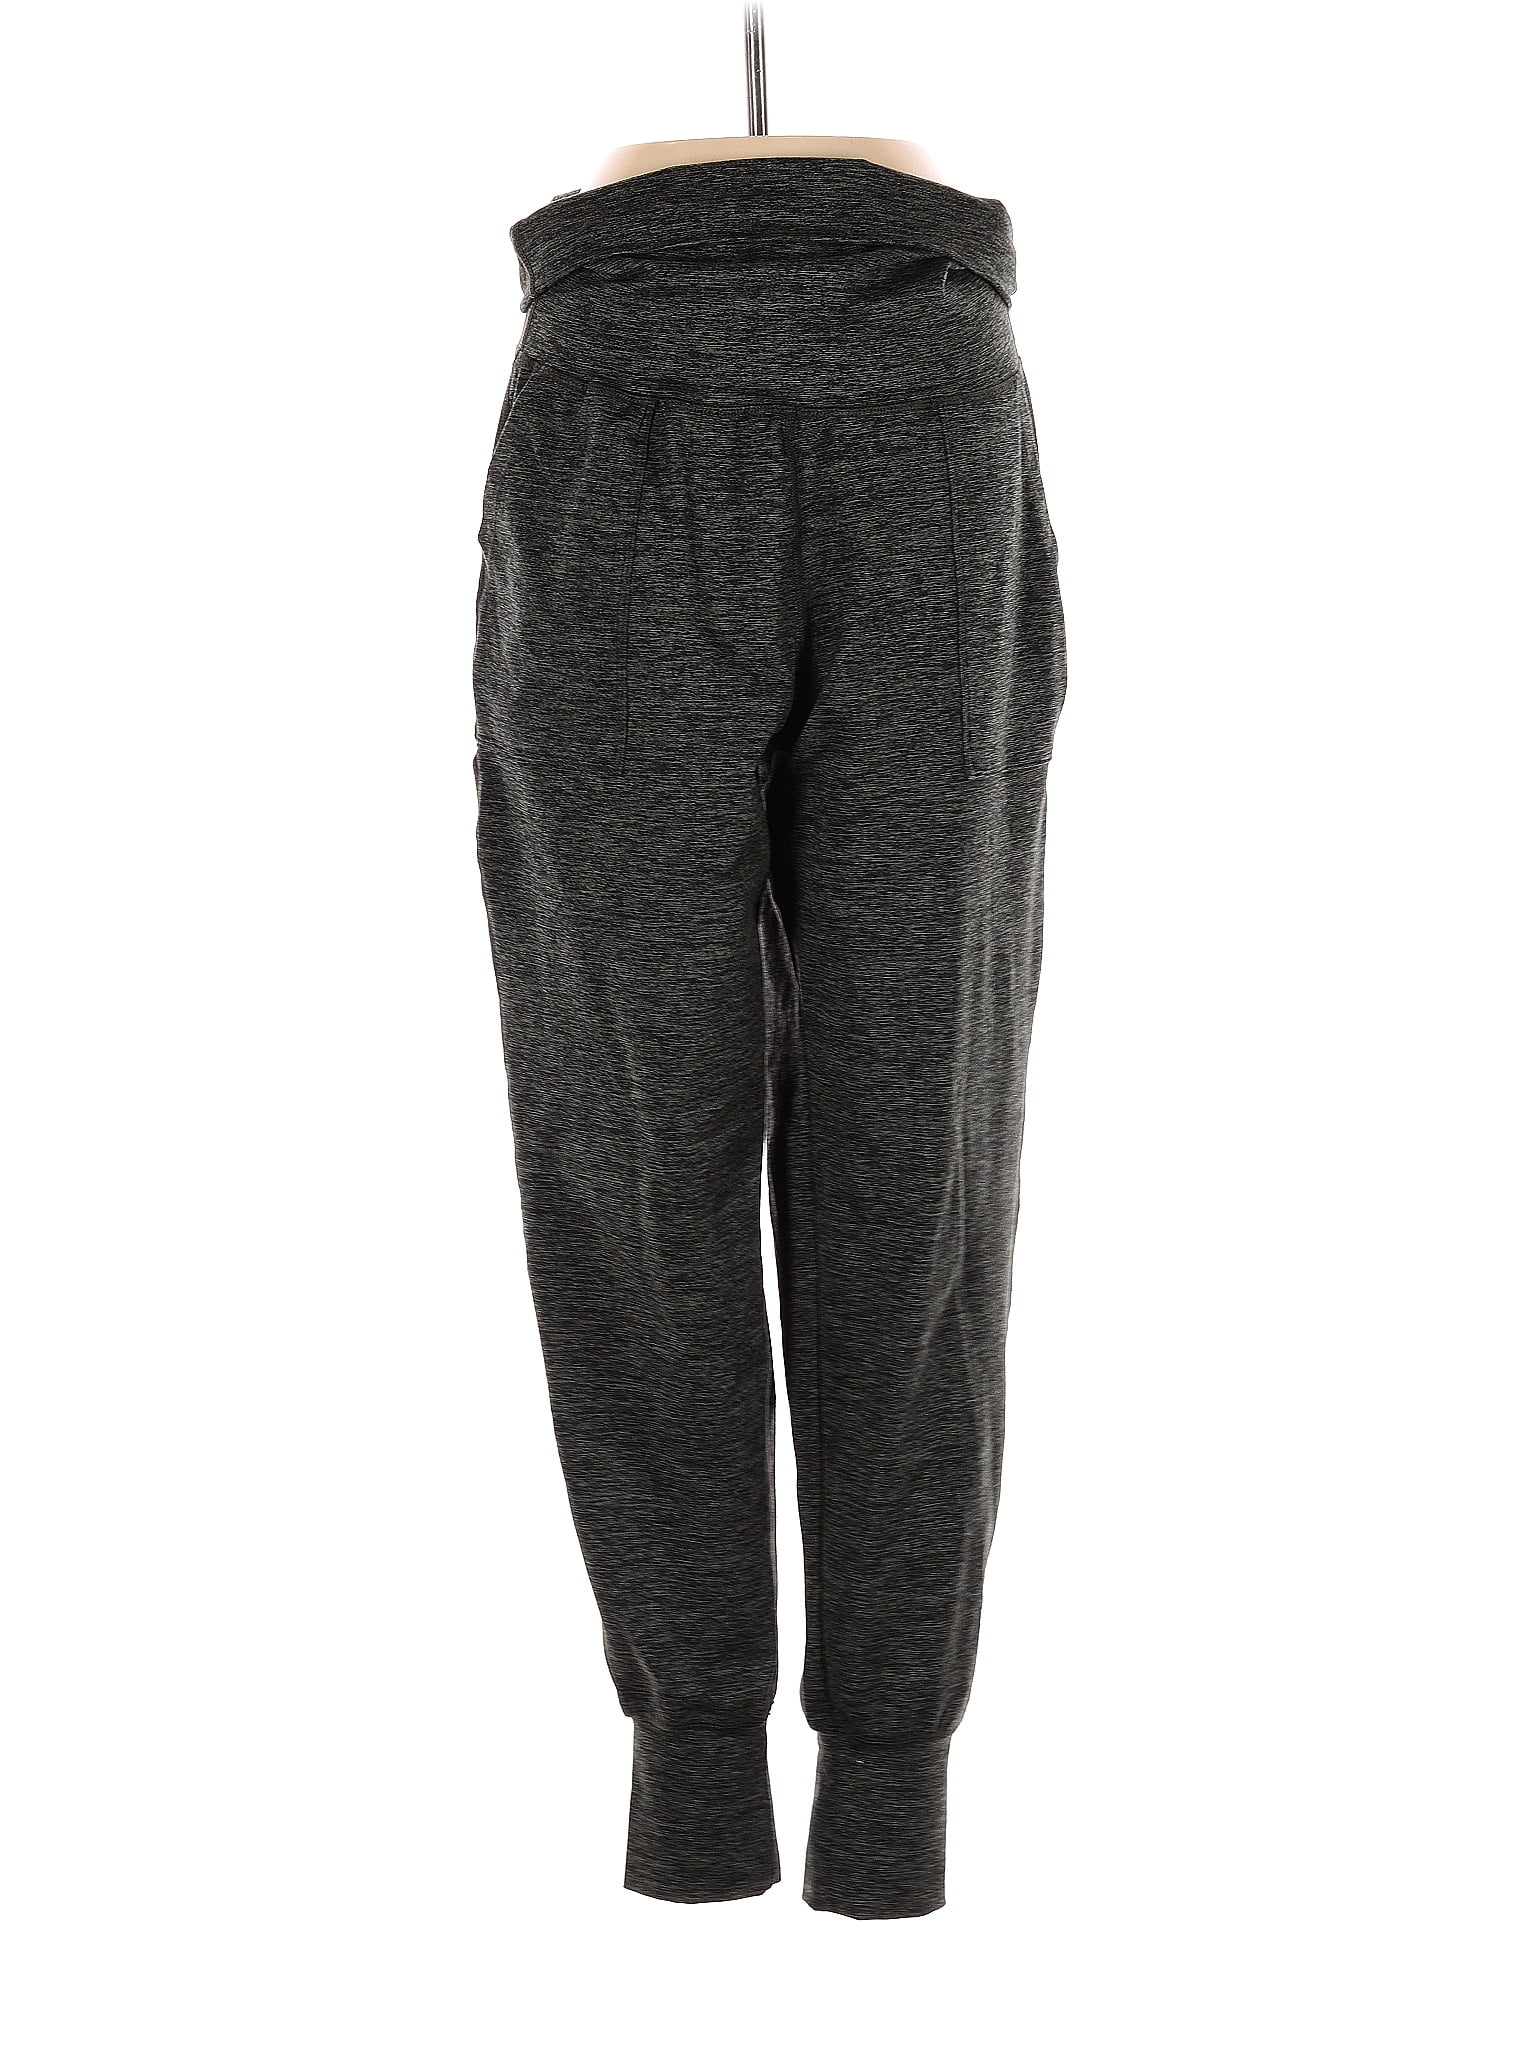 OFFLINE by Aerie Gray Sweatpants Size S - 56% off